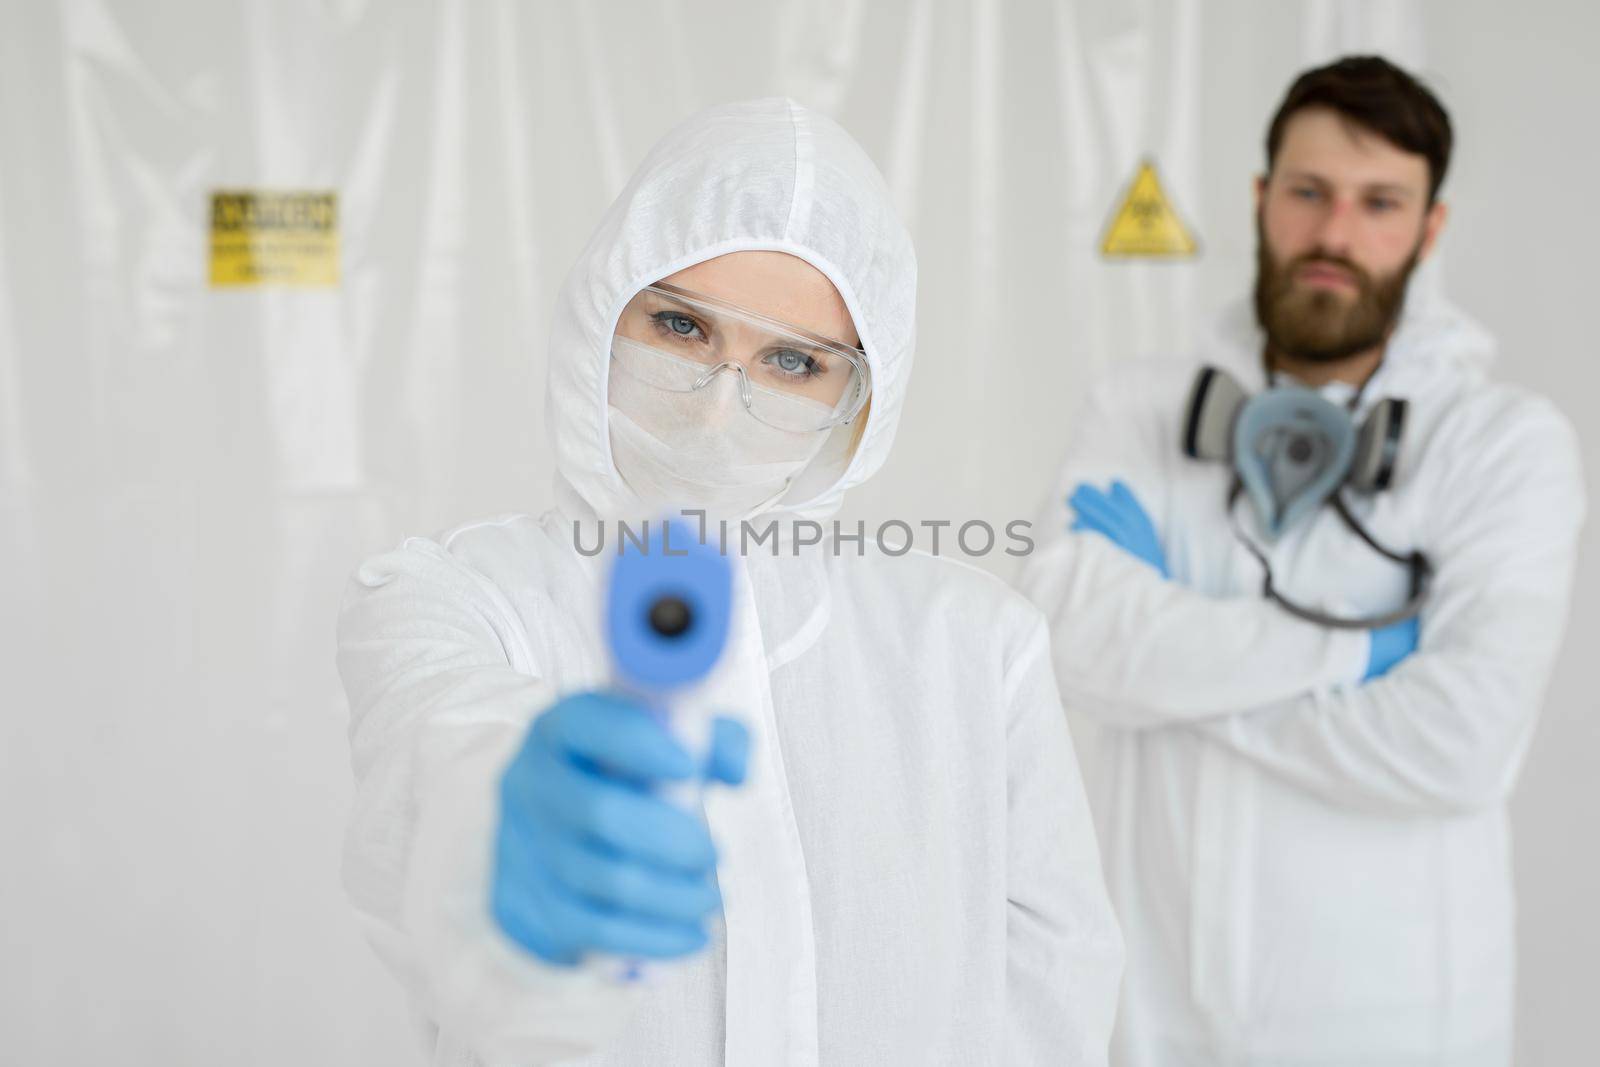 Medical professionals in protective clothing measuring contactless fever at Covid-19 test center during coronavirus epidemic by StudioPeace